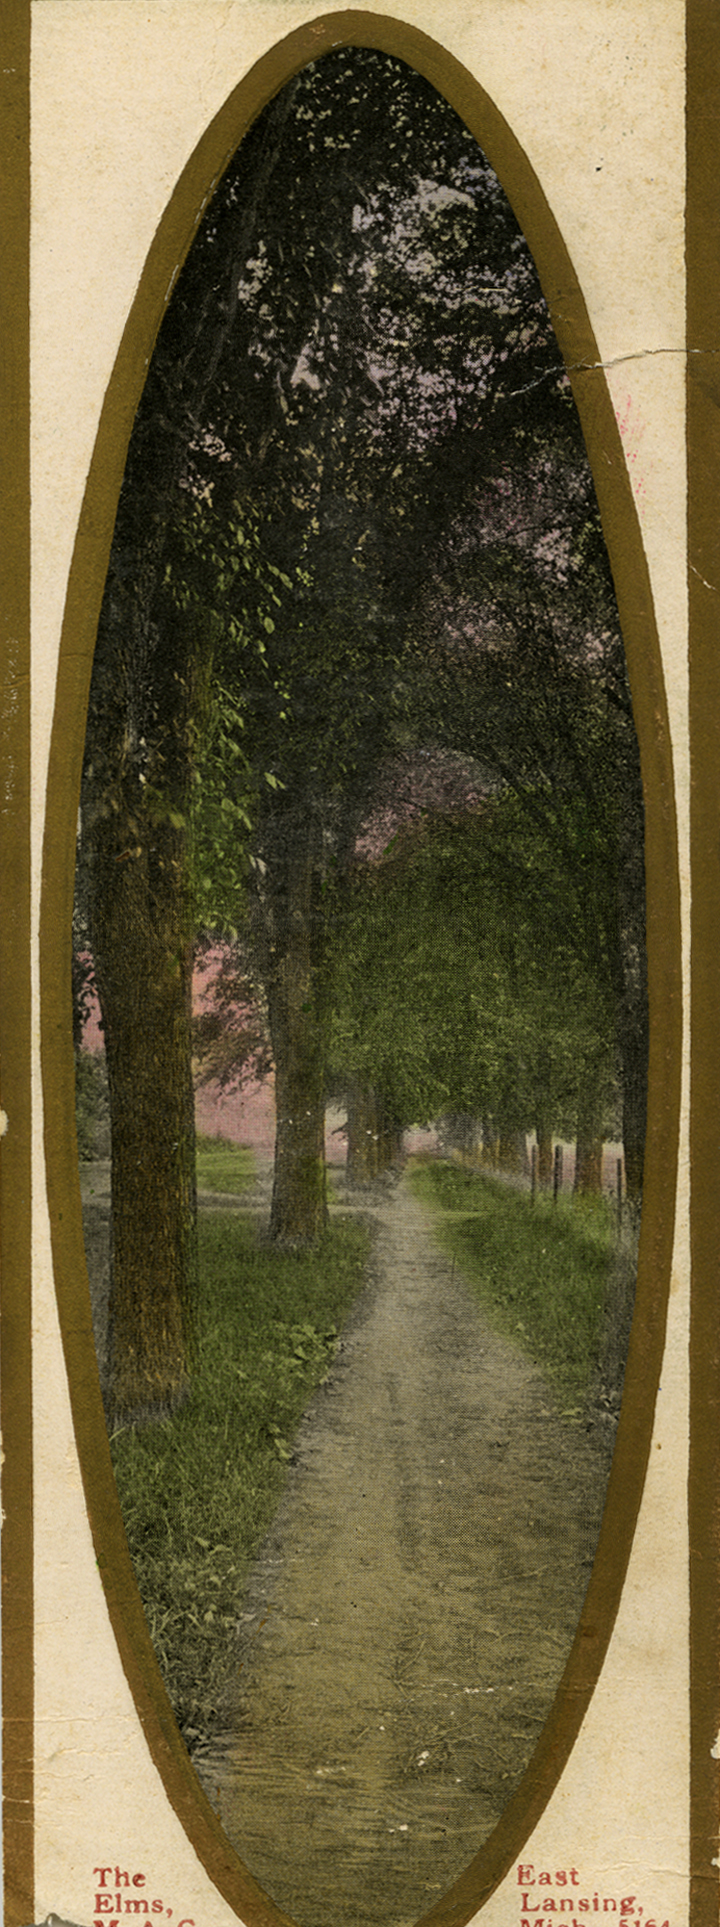 The Elms, date unknown